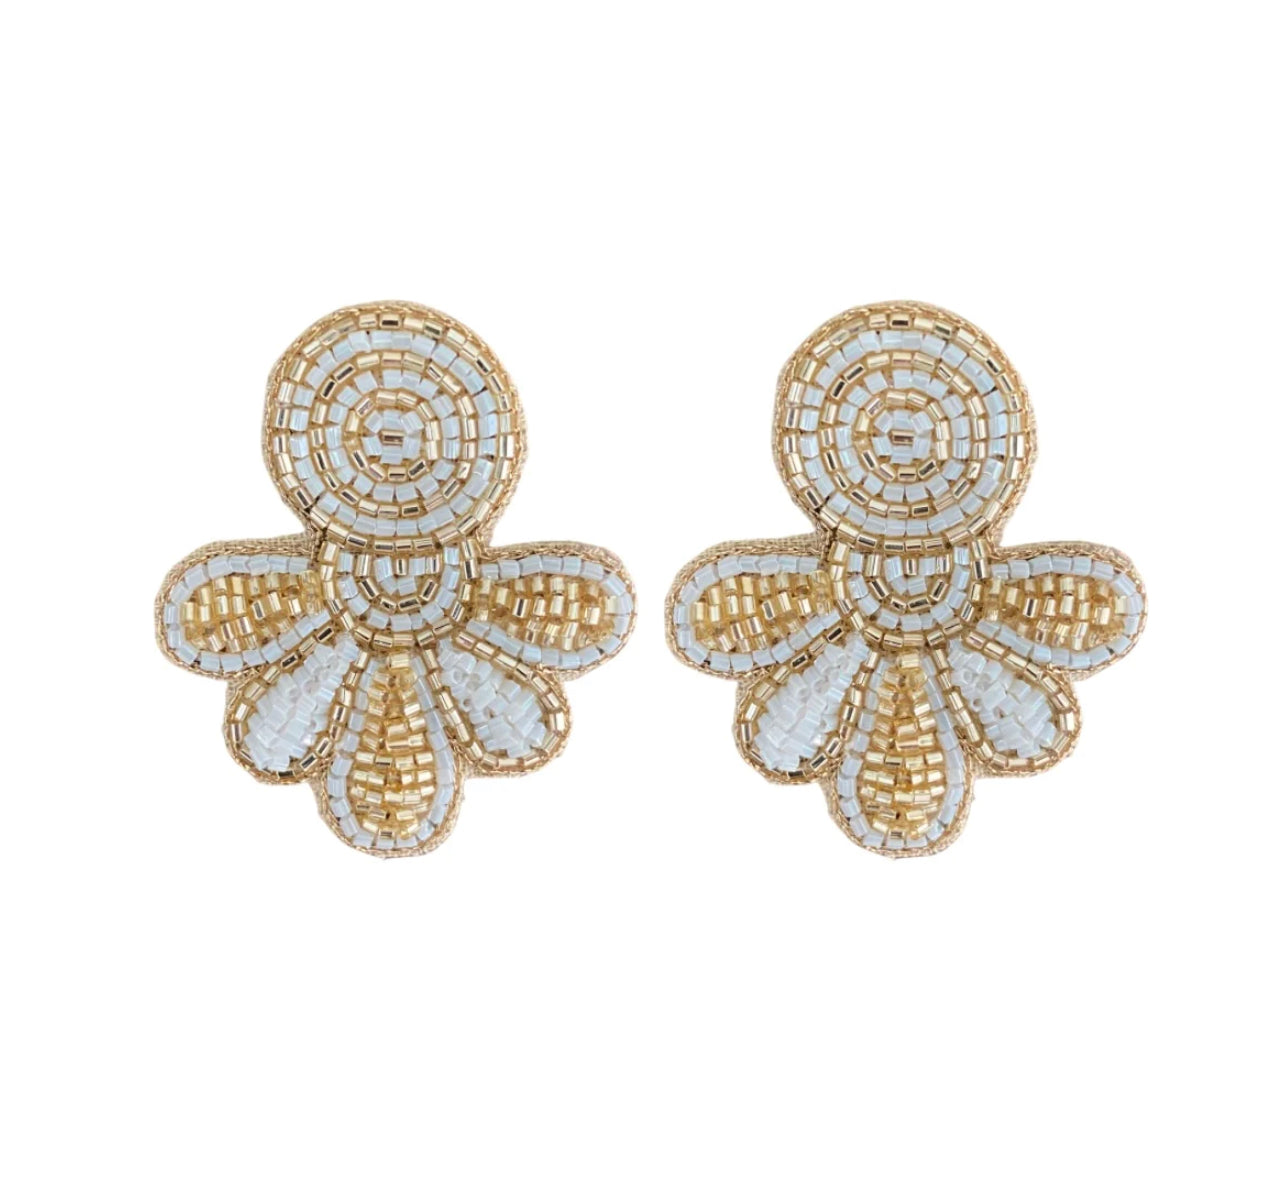 Love stud Earrings in gold and white